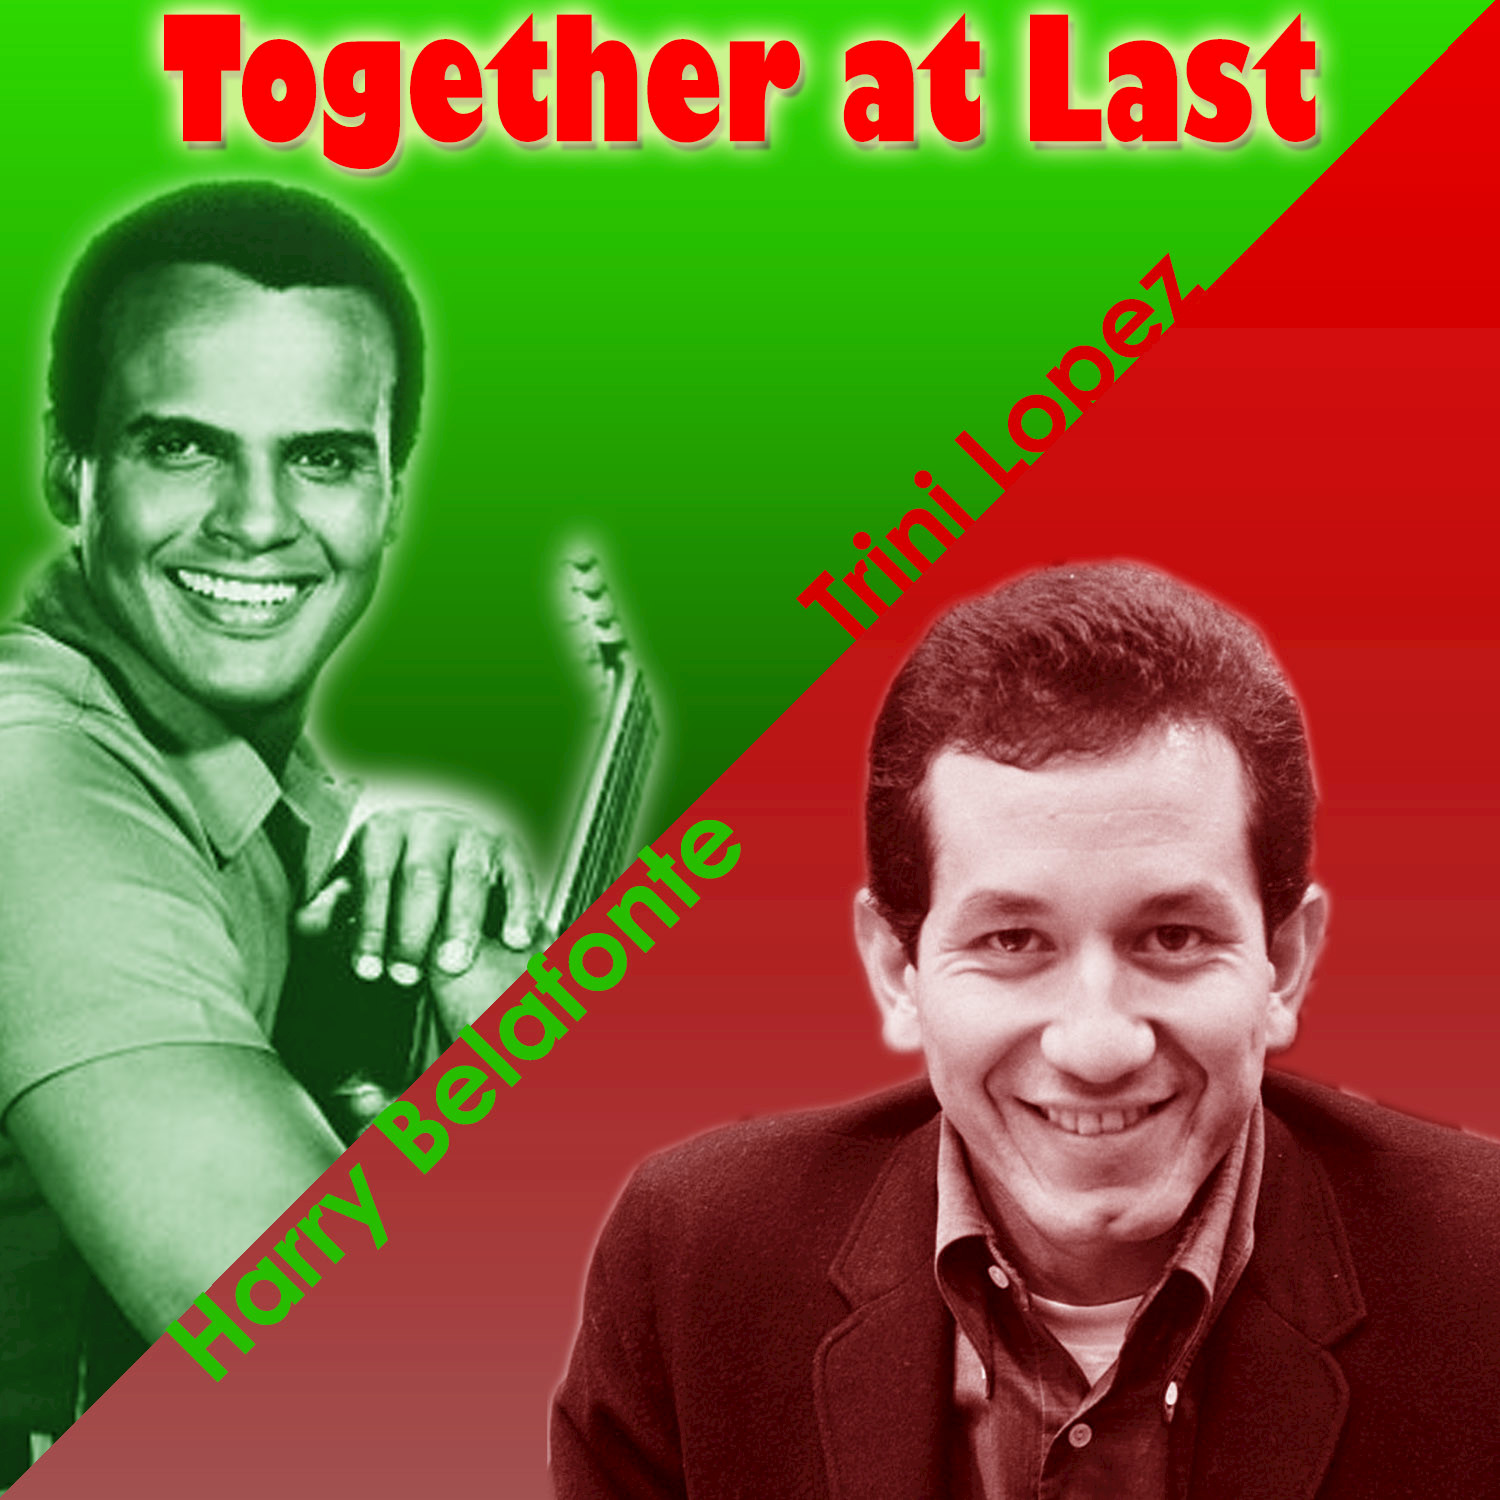 Together at Last - Harry Belafonte and Trini Lopez